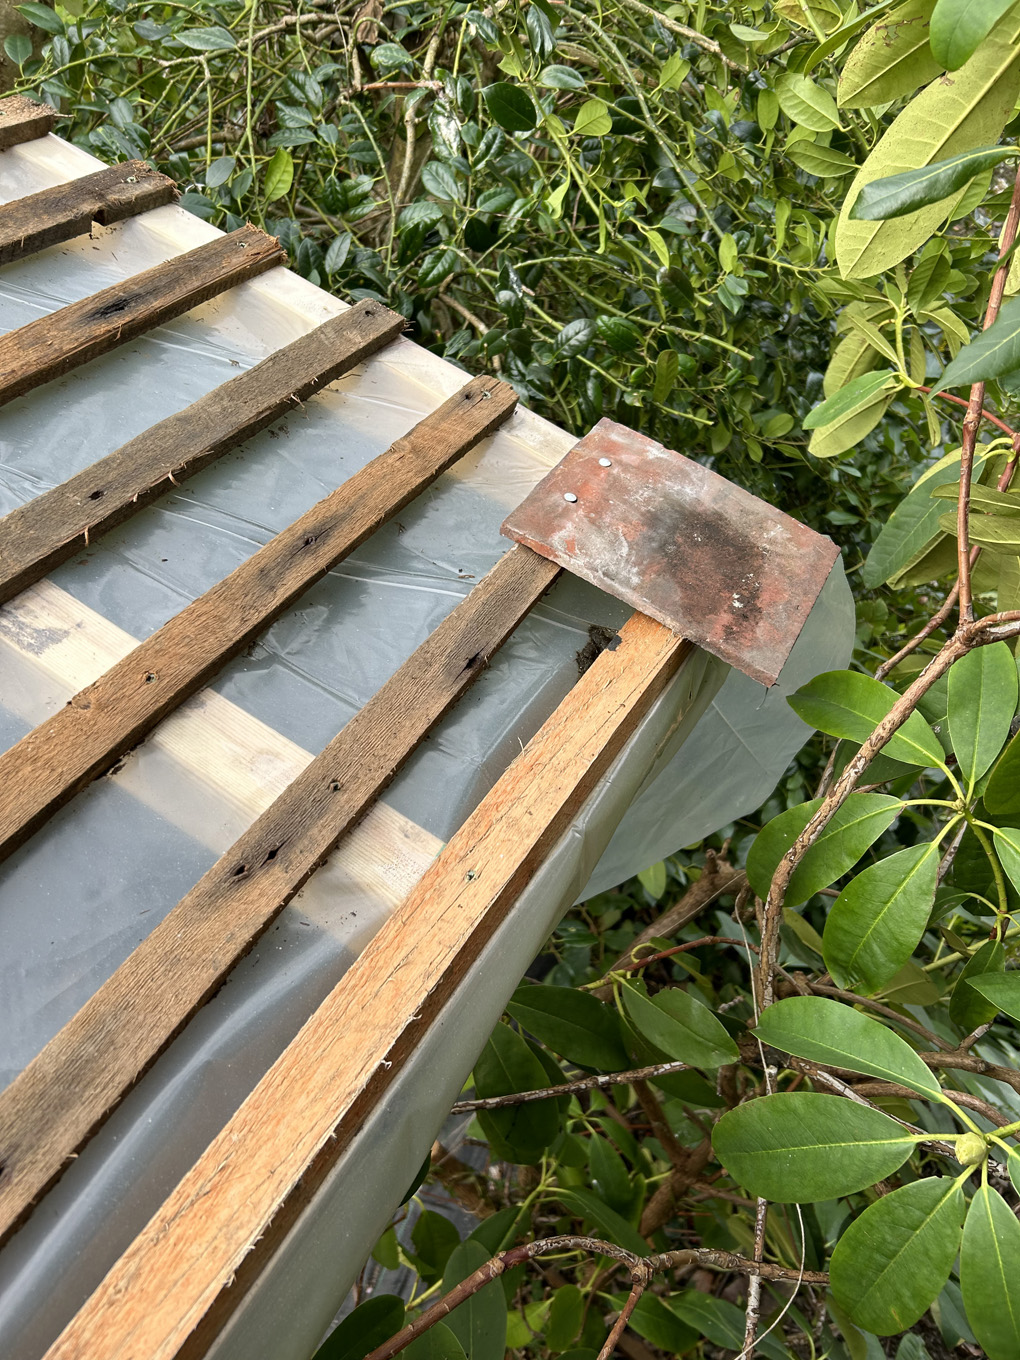 A tile attached to a wooden framed roof